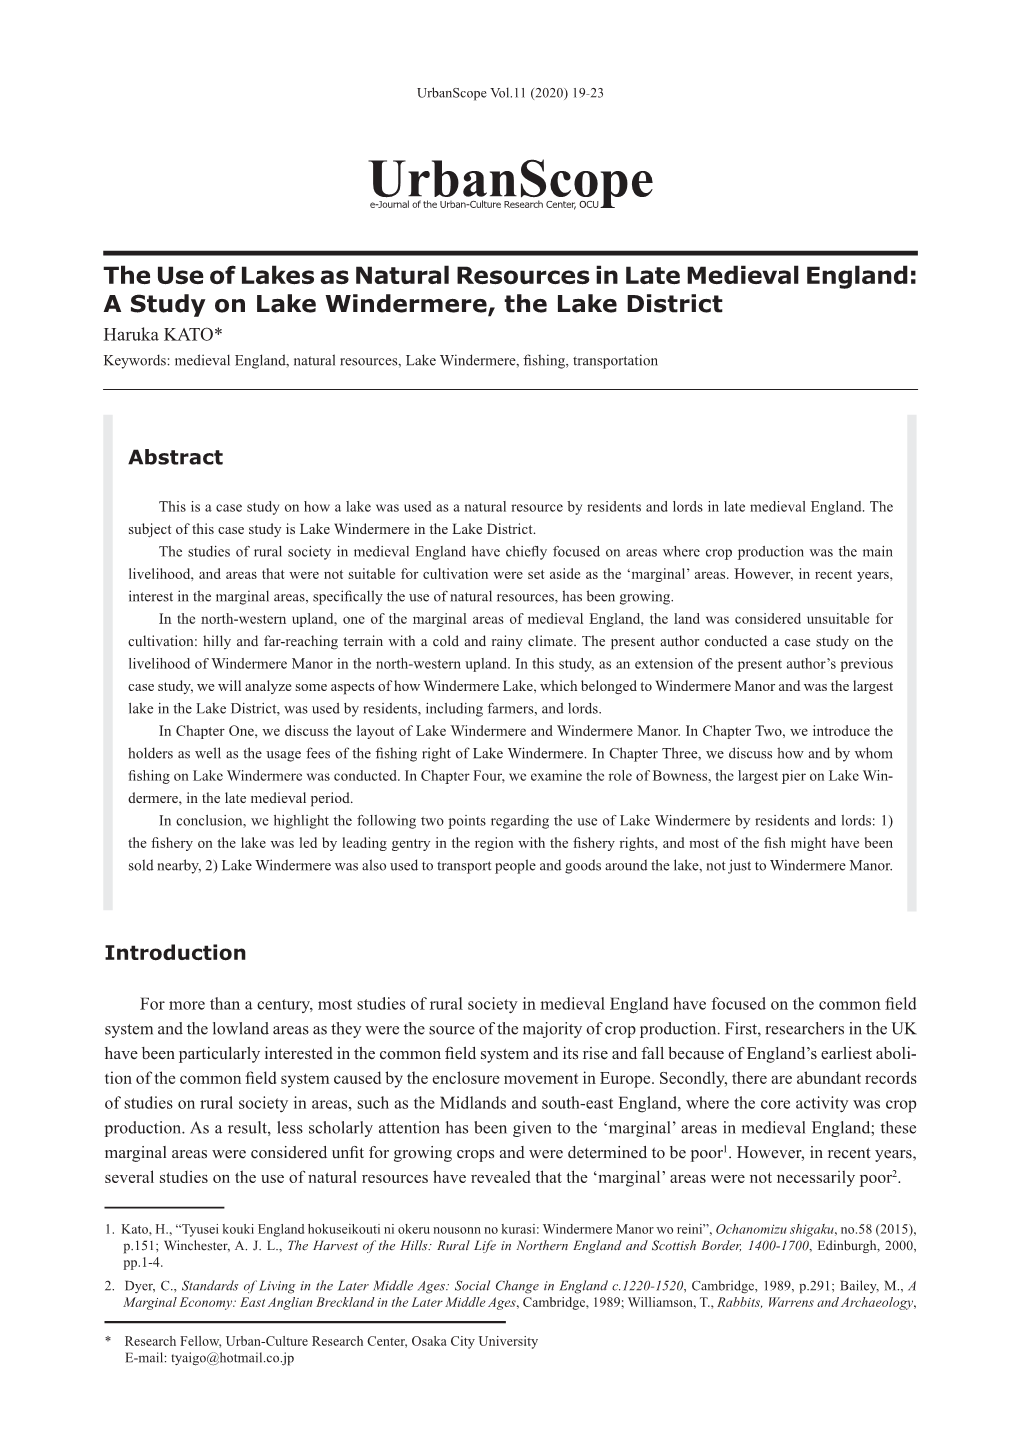 The Use of Lakes As Natural Resources in Late Medieval England: a Study on Lake Windermere, the Lake District